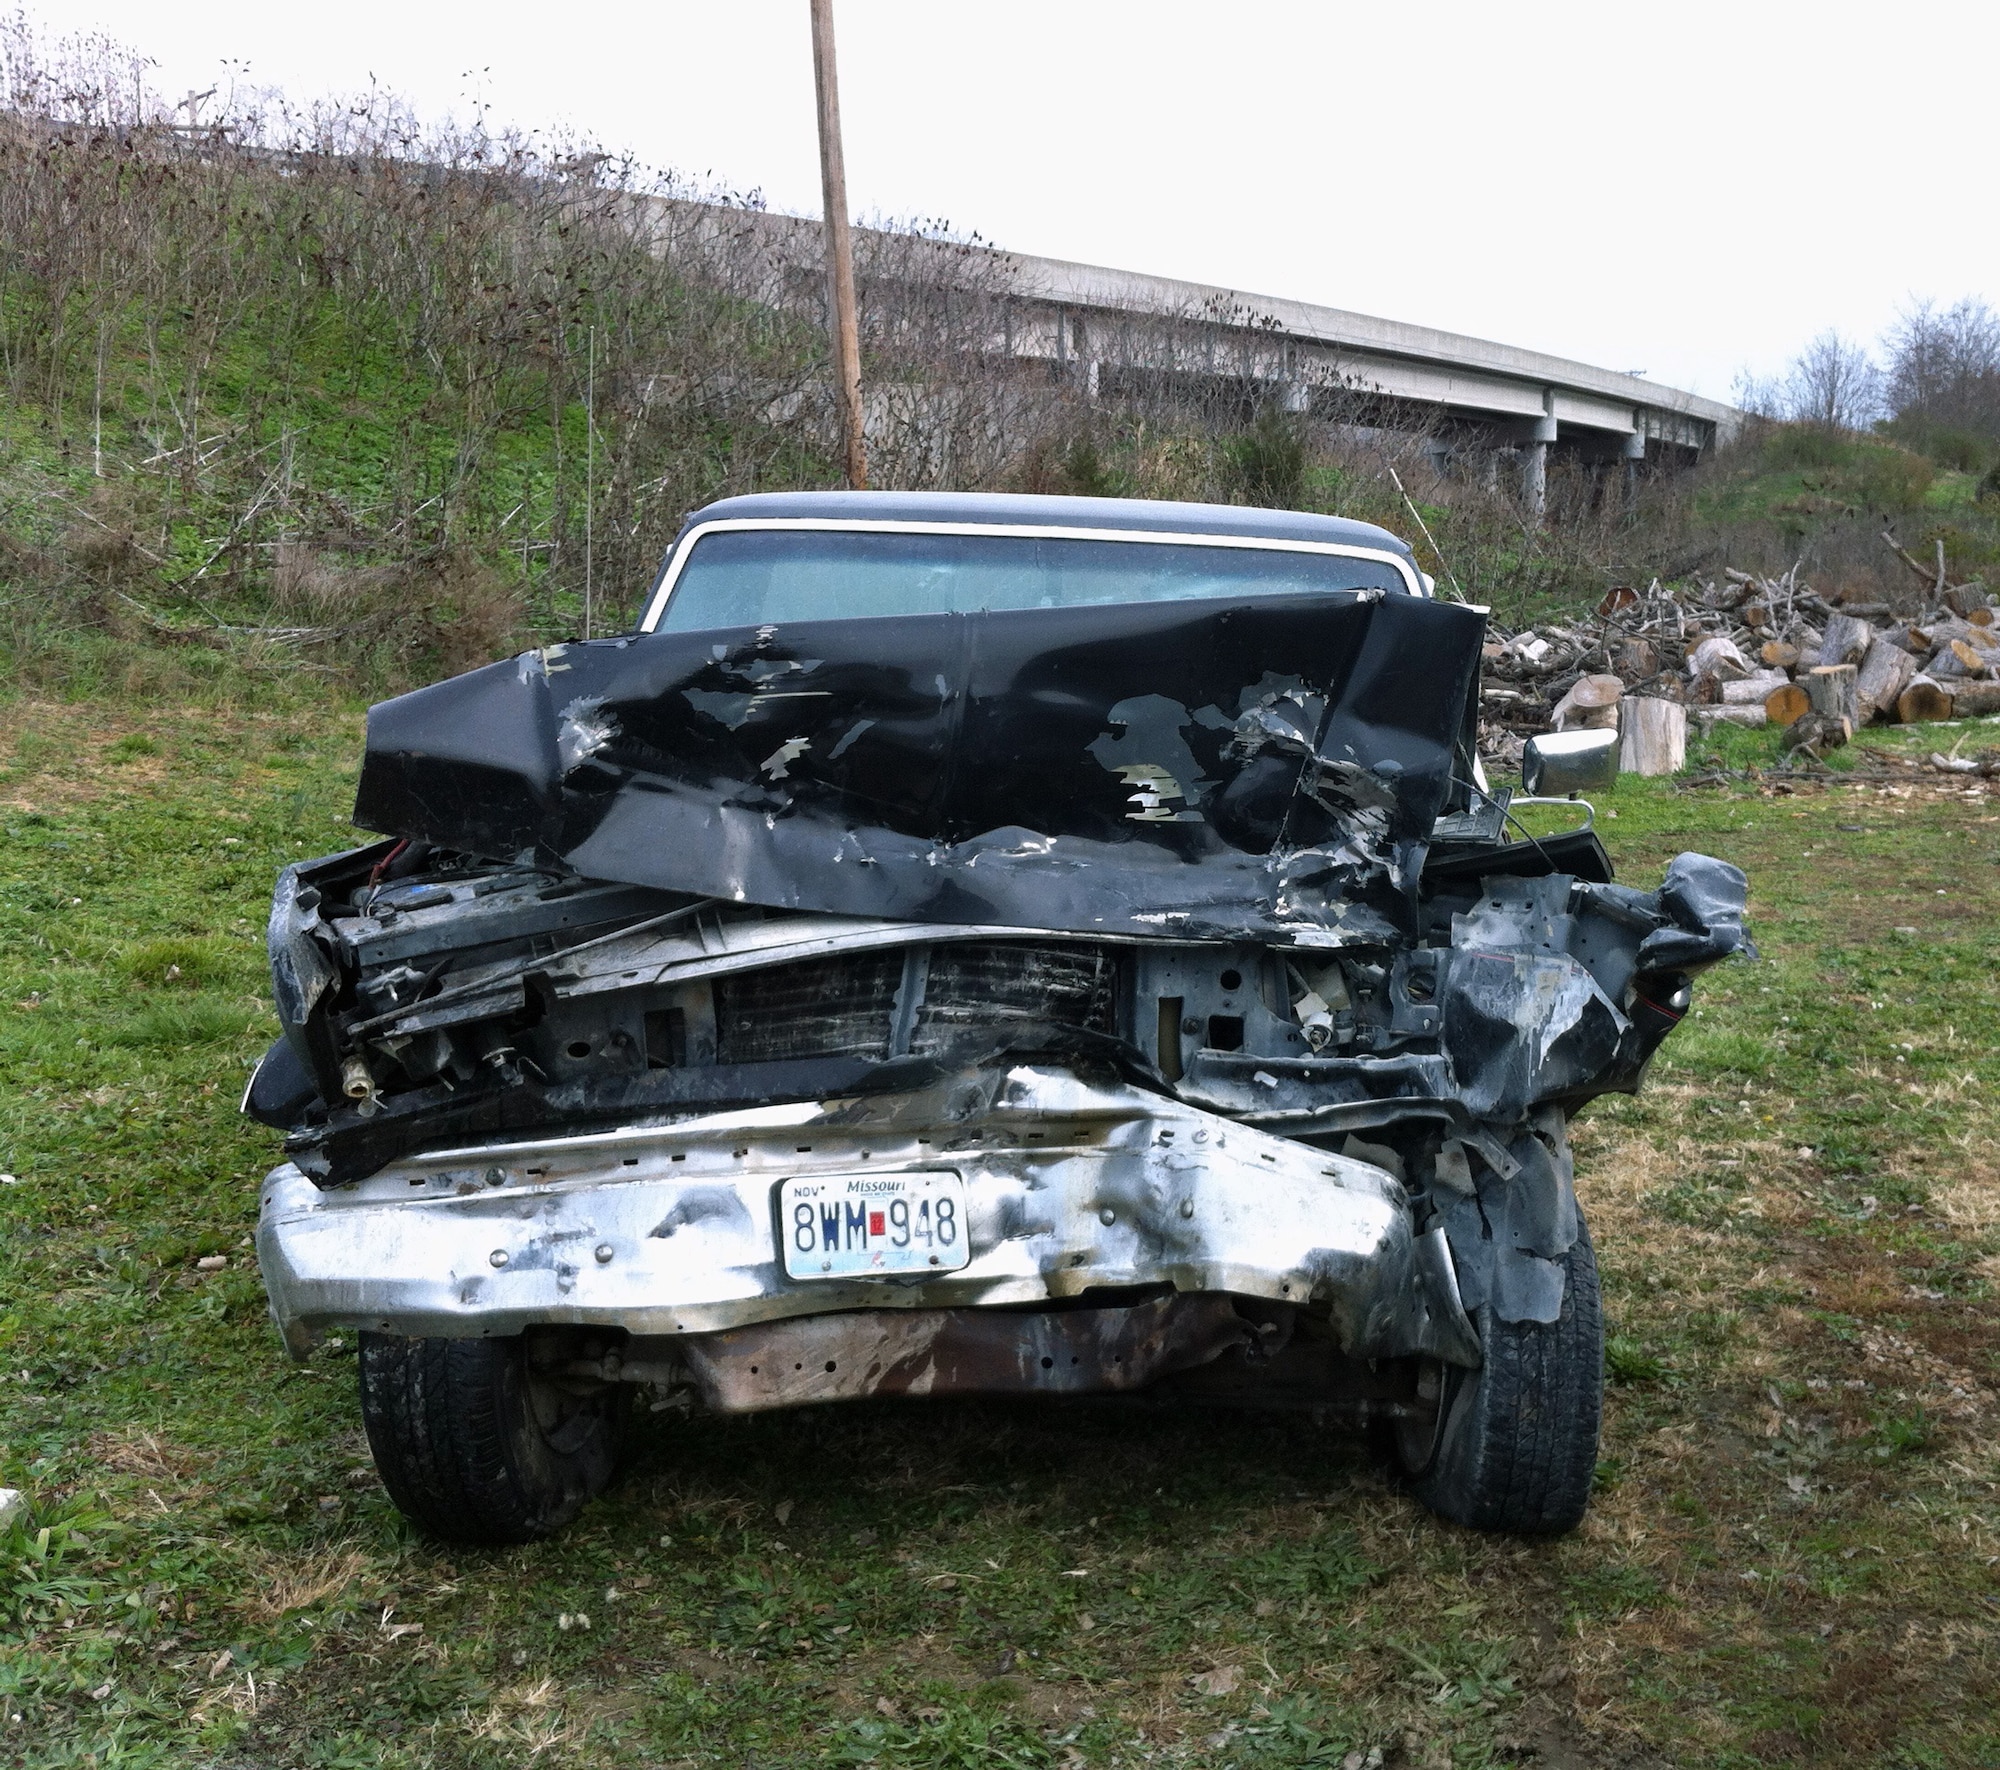 Vehicle after a head-on collision with another truck. (Courtesy photo)